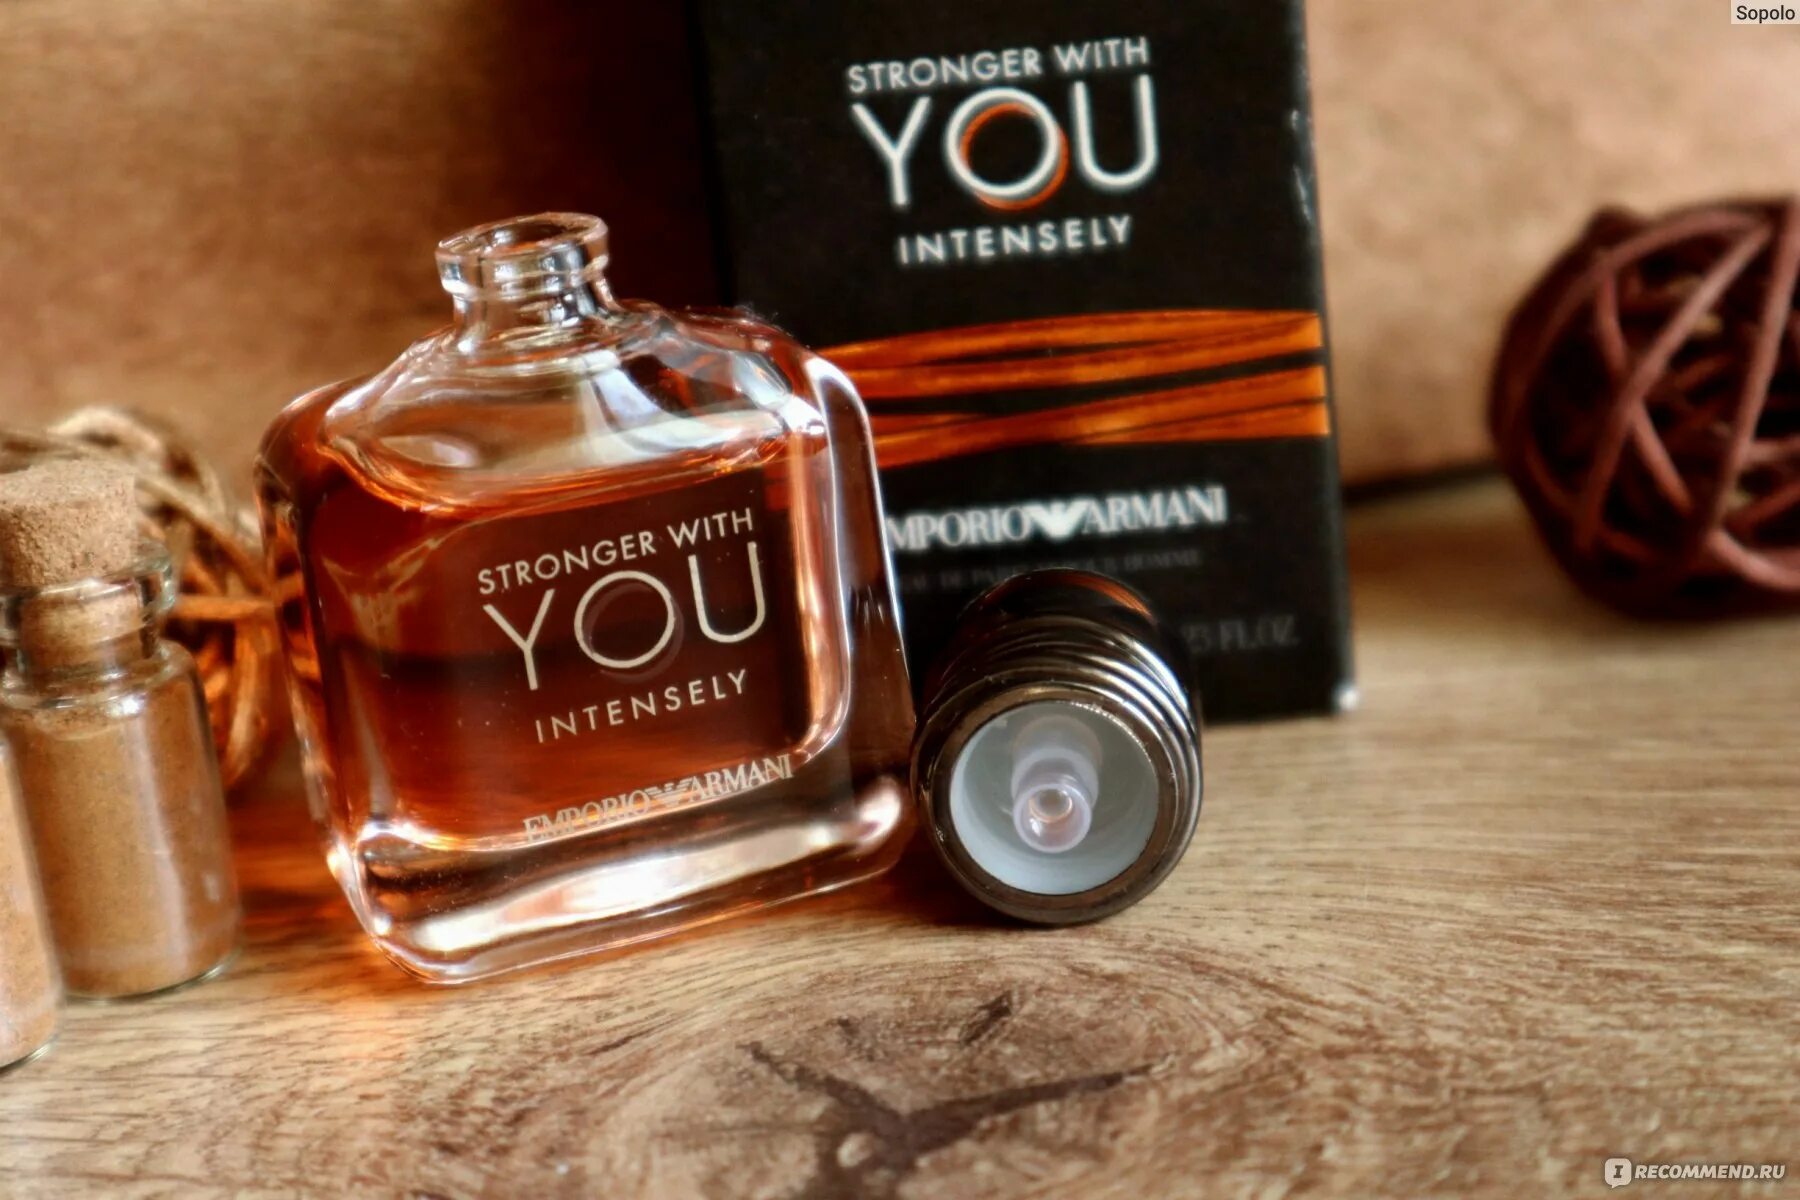 Stronger with you only. Древесные духи. Древесный аромат для мужчин. Armani stronger with you intensely. Emporio Armani stronger with you intensely.